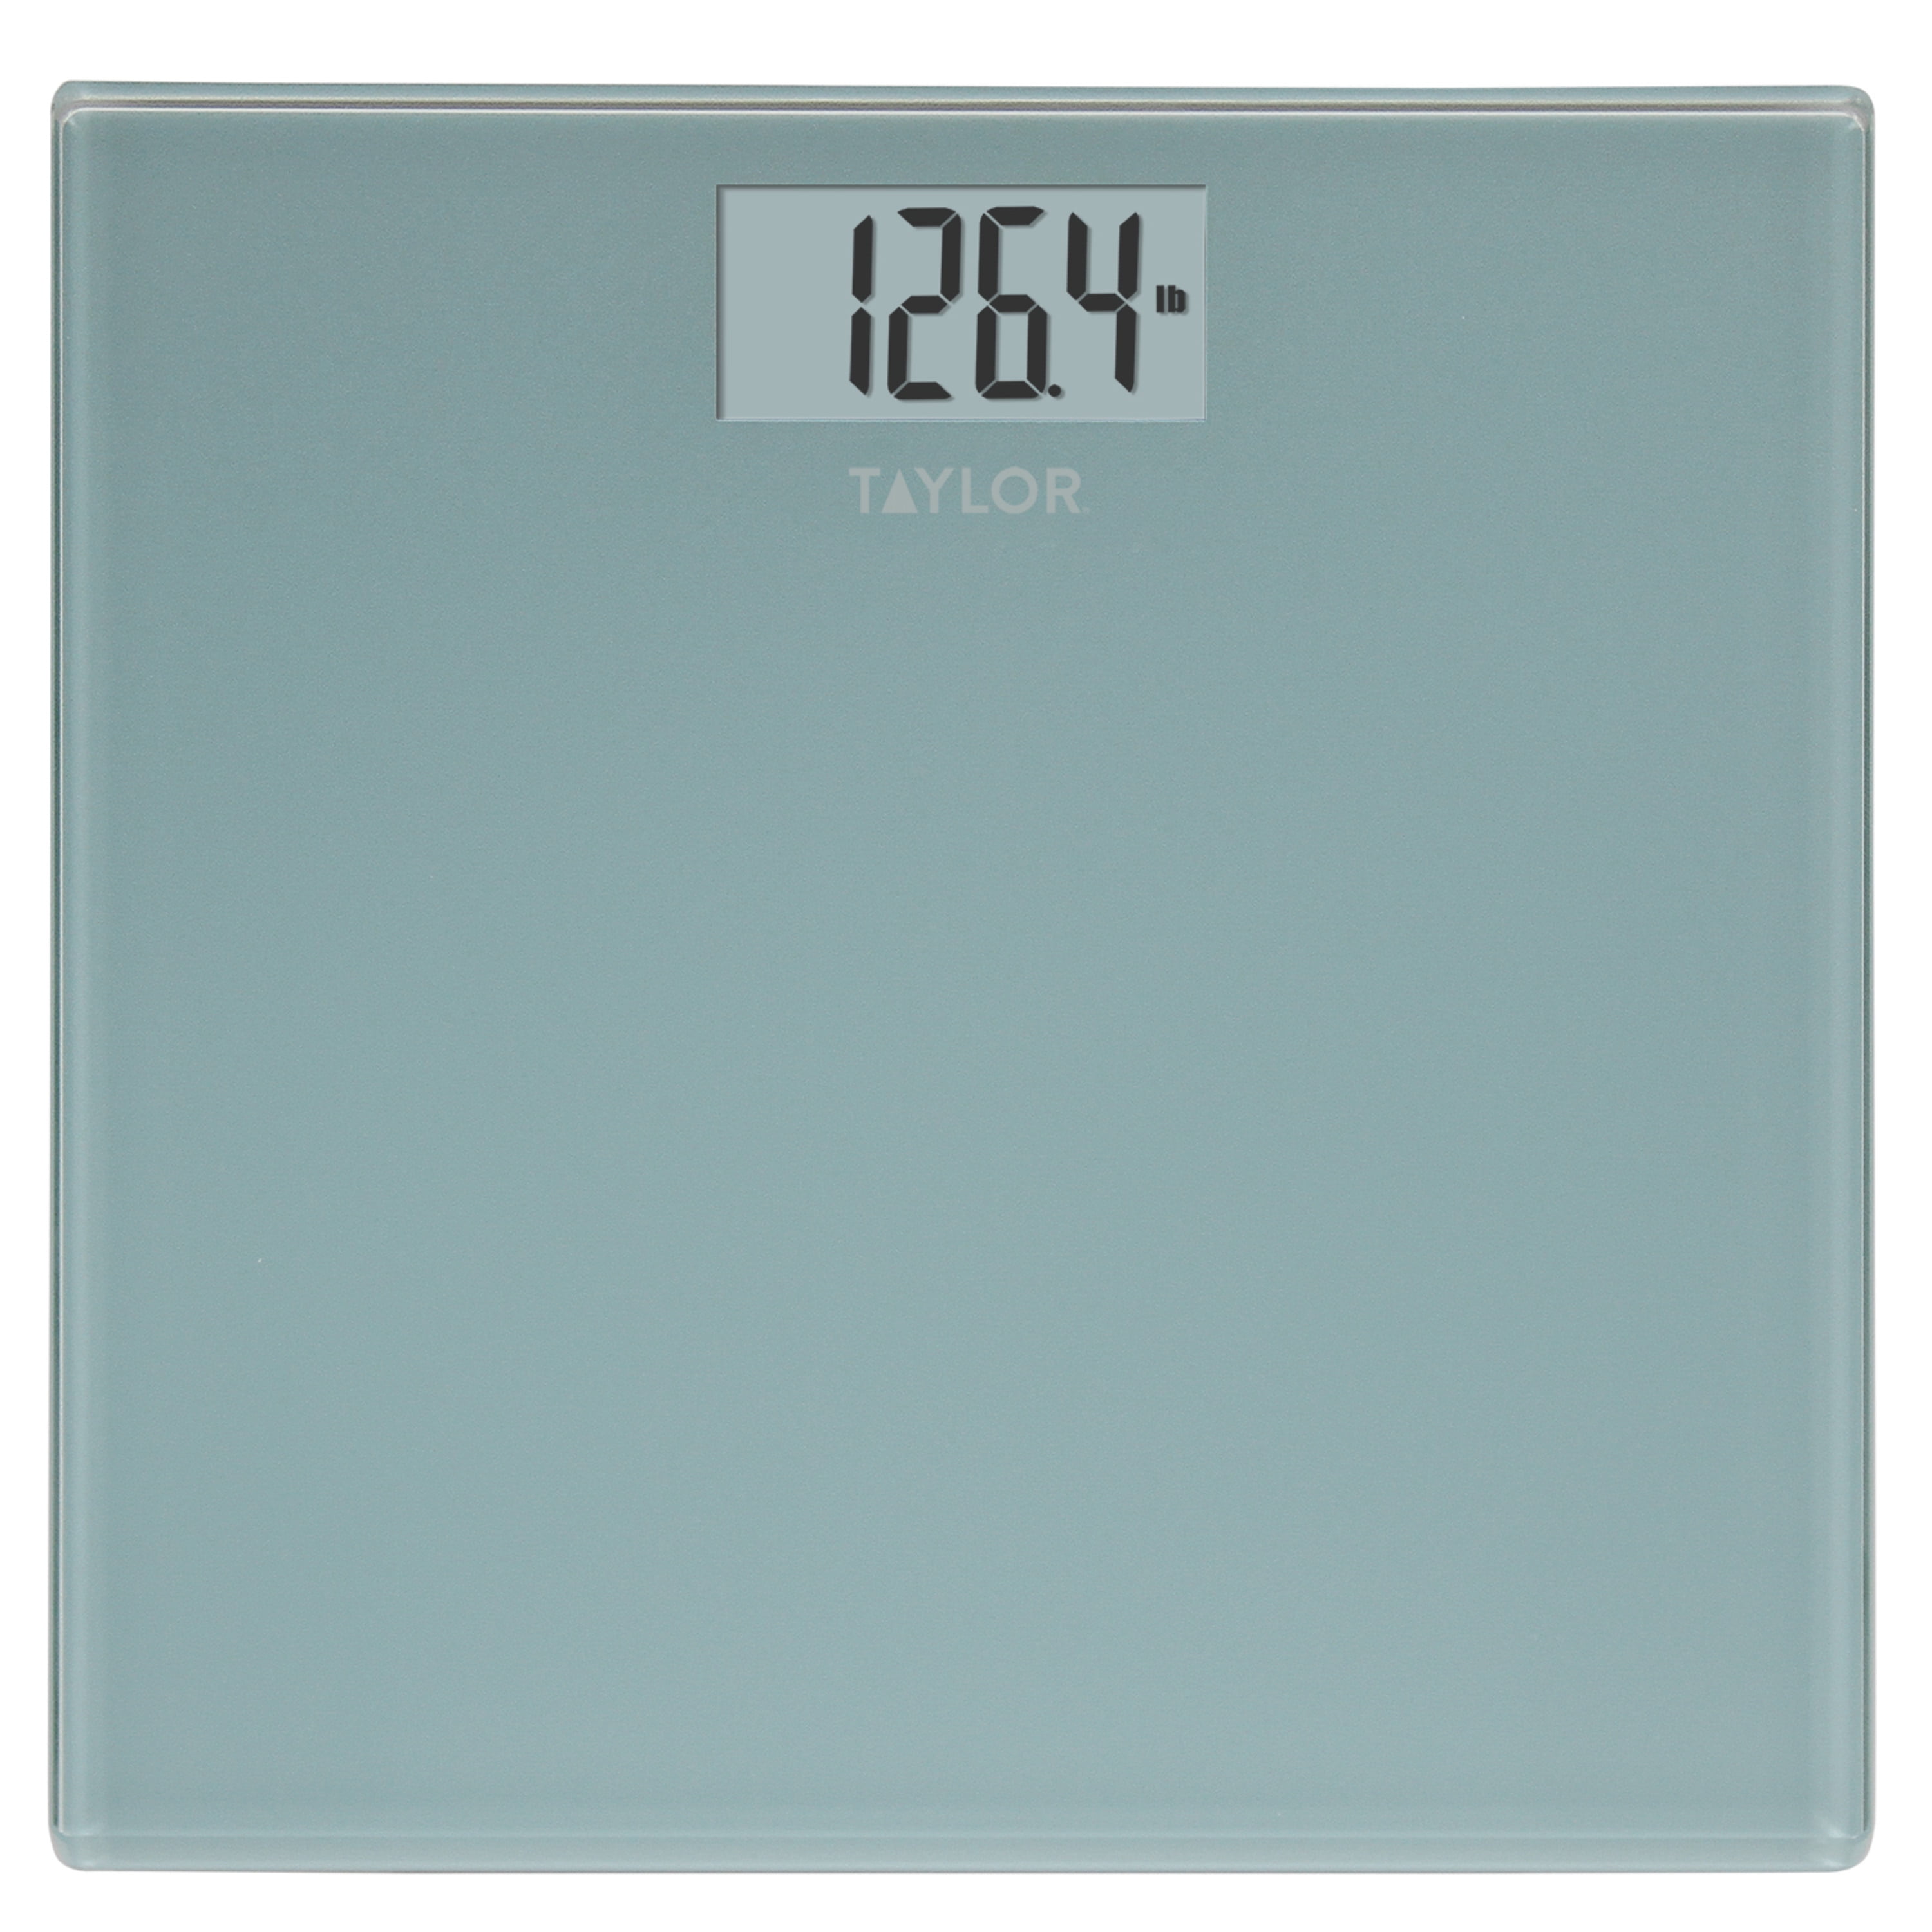 JINHH Mechanical Scales for Body Weight,Large Screen Compared with Tempered Glass Material it is Safer Intelligent Weighing Unit Switching Accurate Measurement The Maximum Load is 400bl 